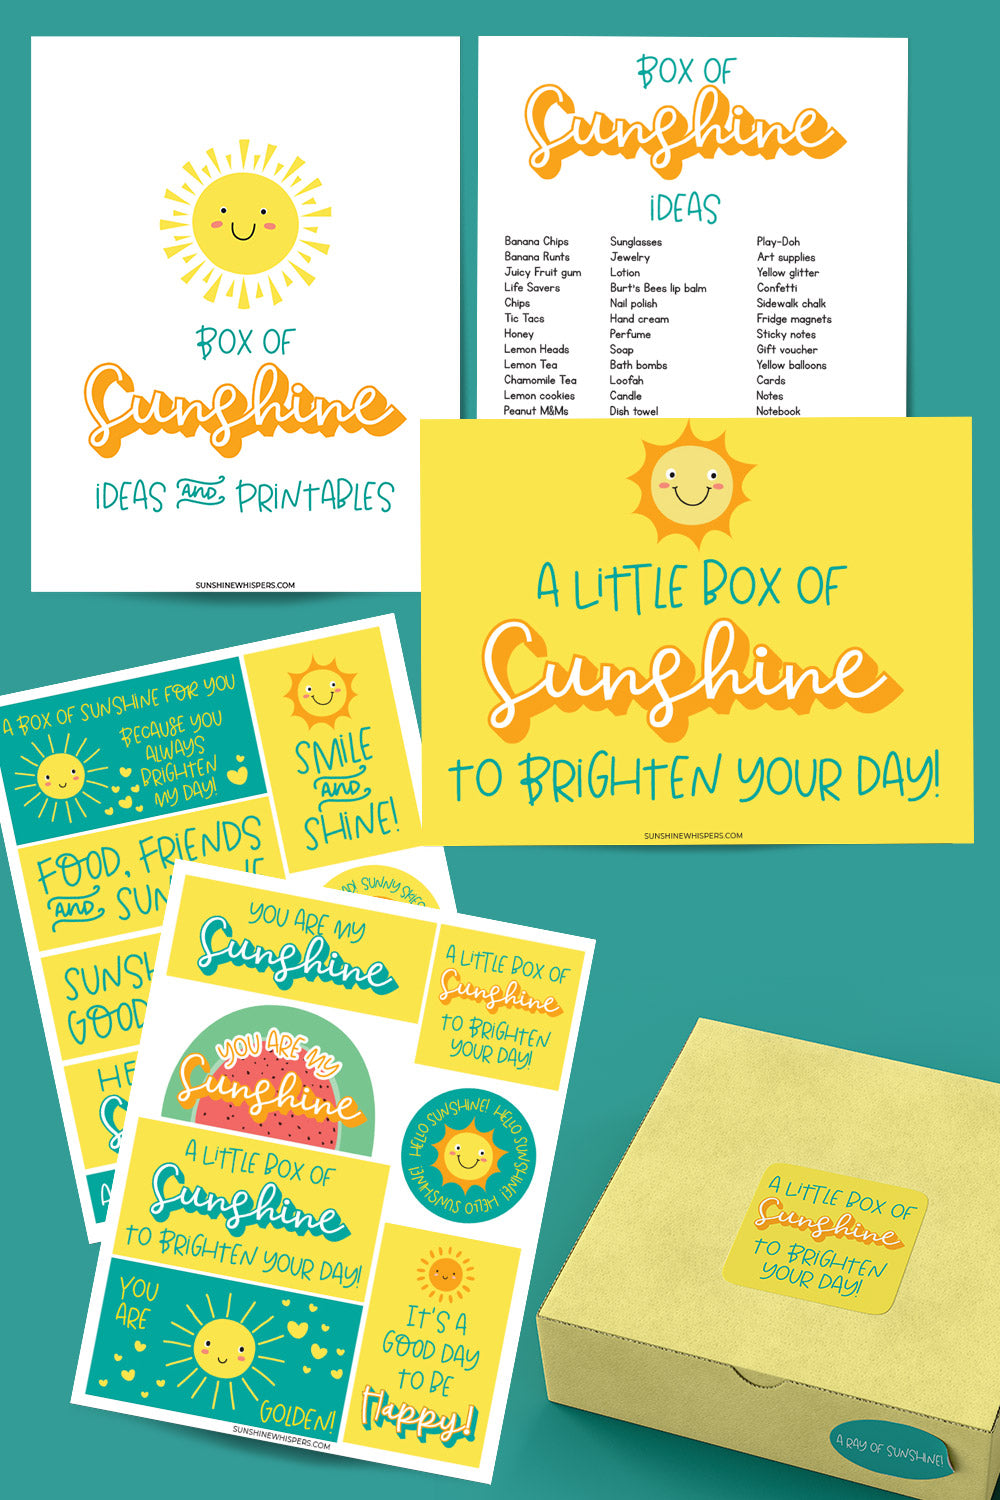 Box of Sunshine Ideas and Printable Pack